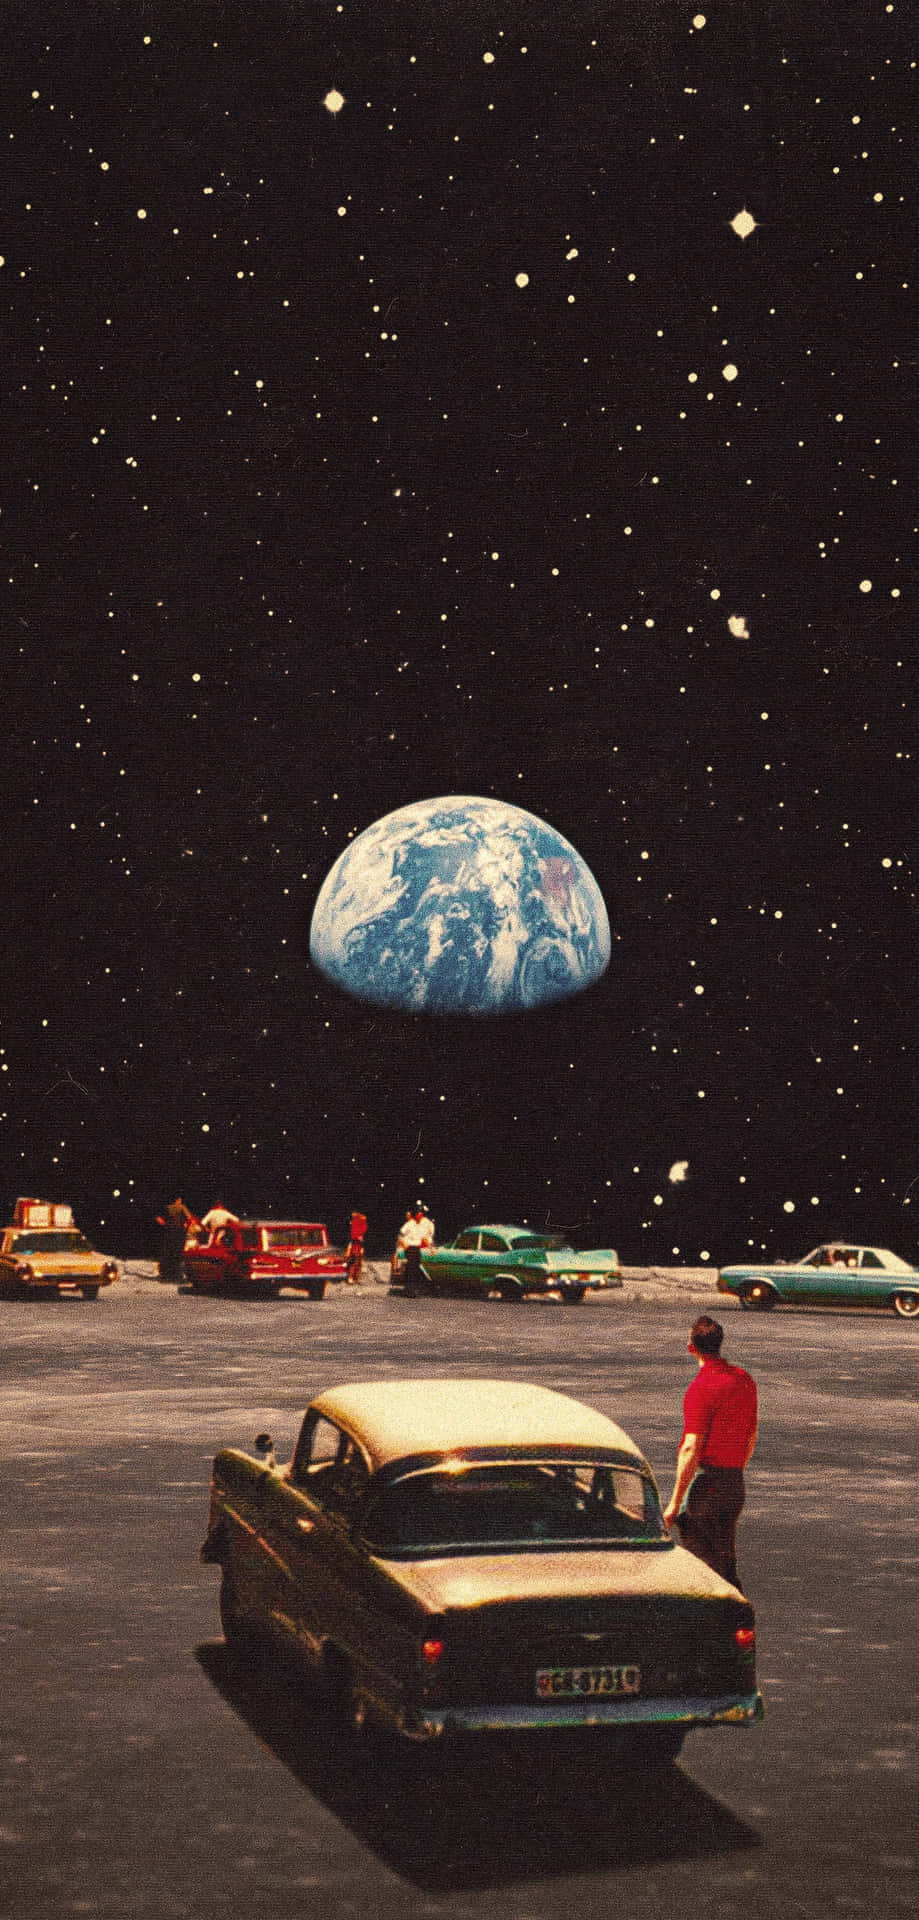 Vintage Trippy Retro Aesthetic Car Parked On The Moon Wallpaper